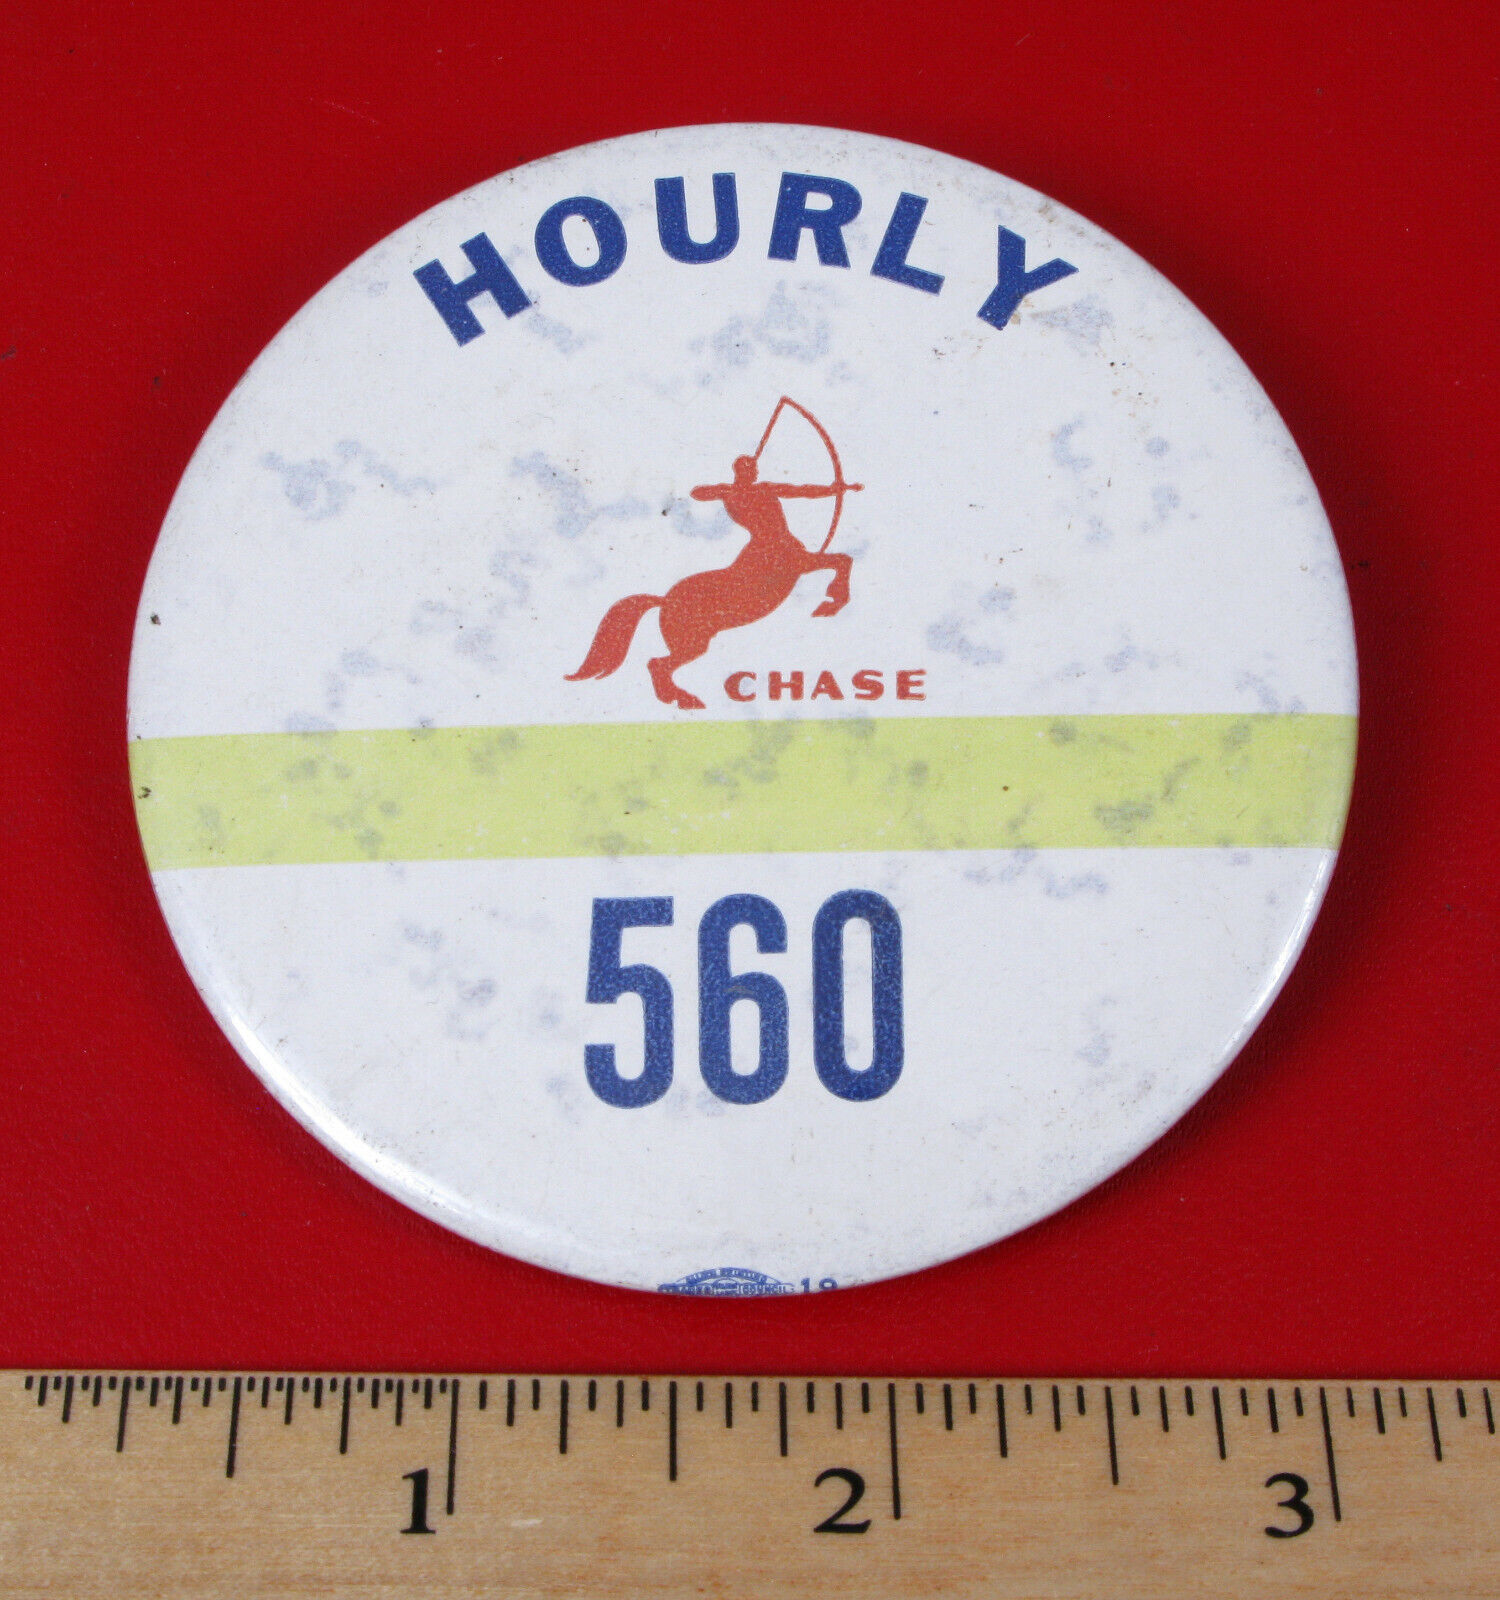 VINTAGE BUTTON HOURLY WAGES CHASE 560 PEGASUS LARGE ADVERTISING UNION WORKPLACE